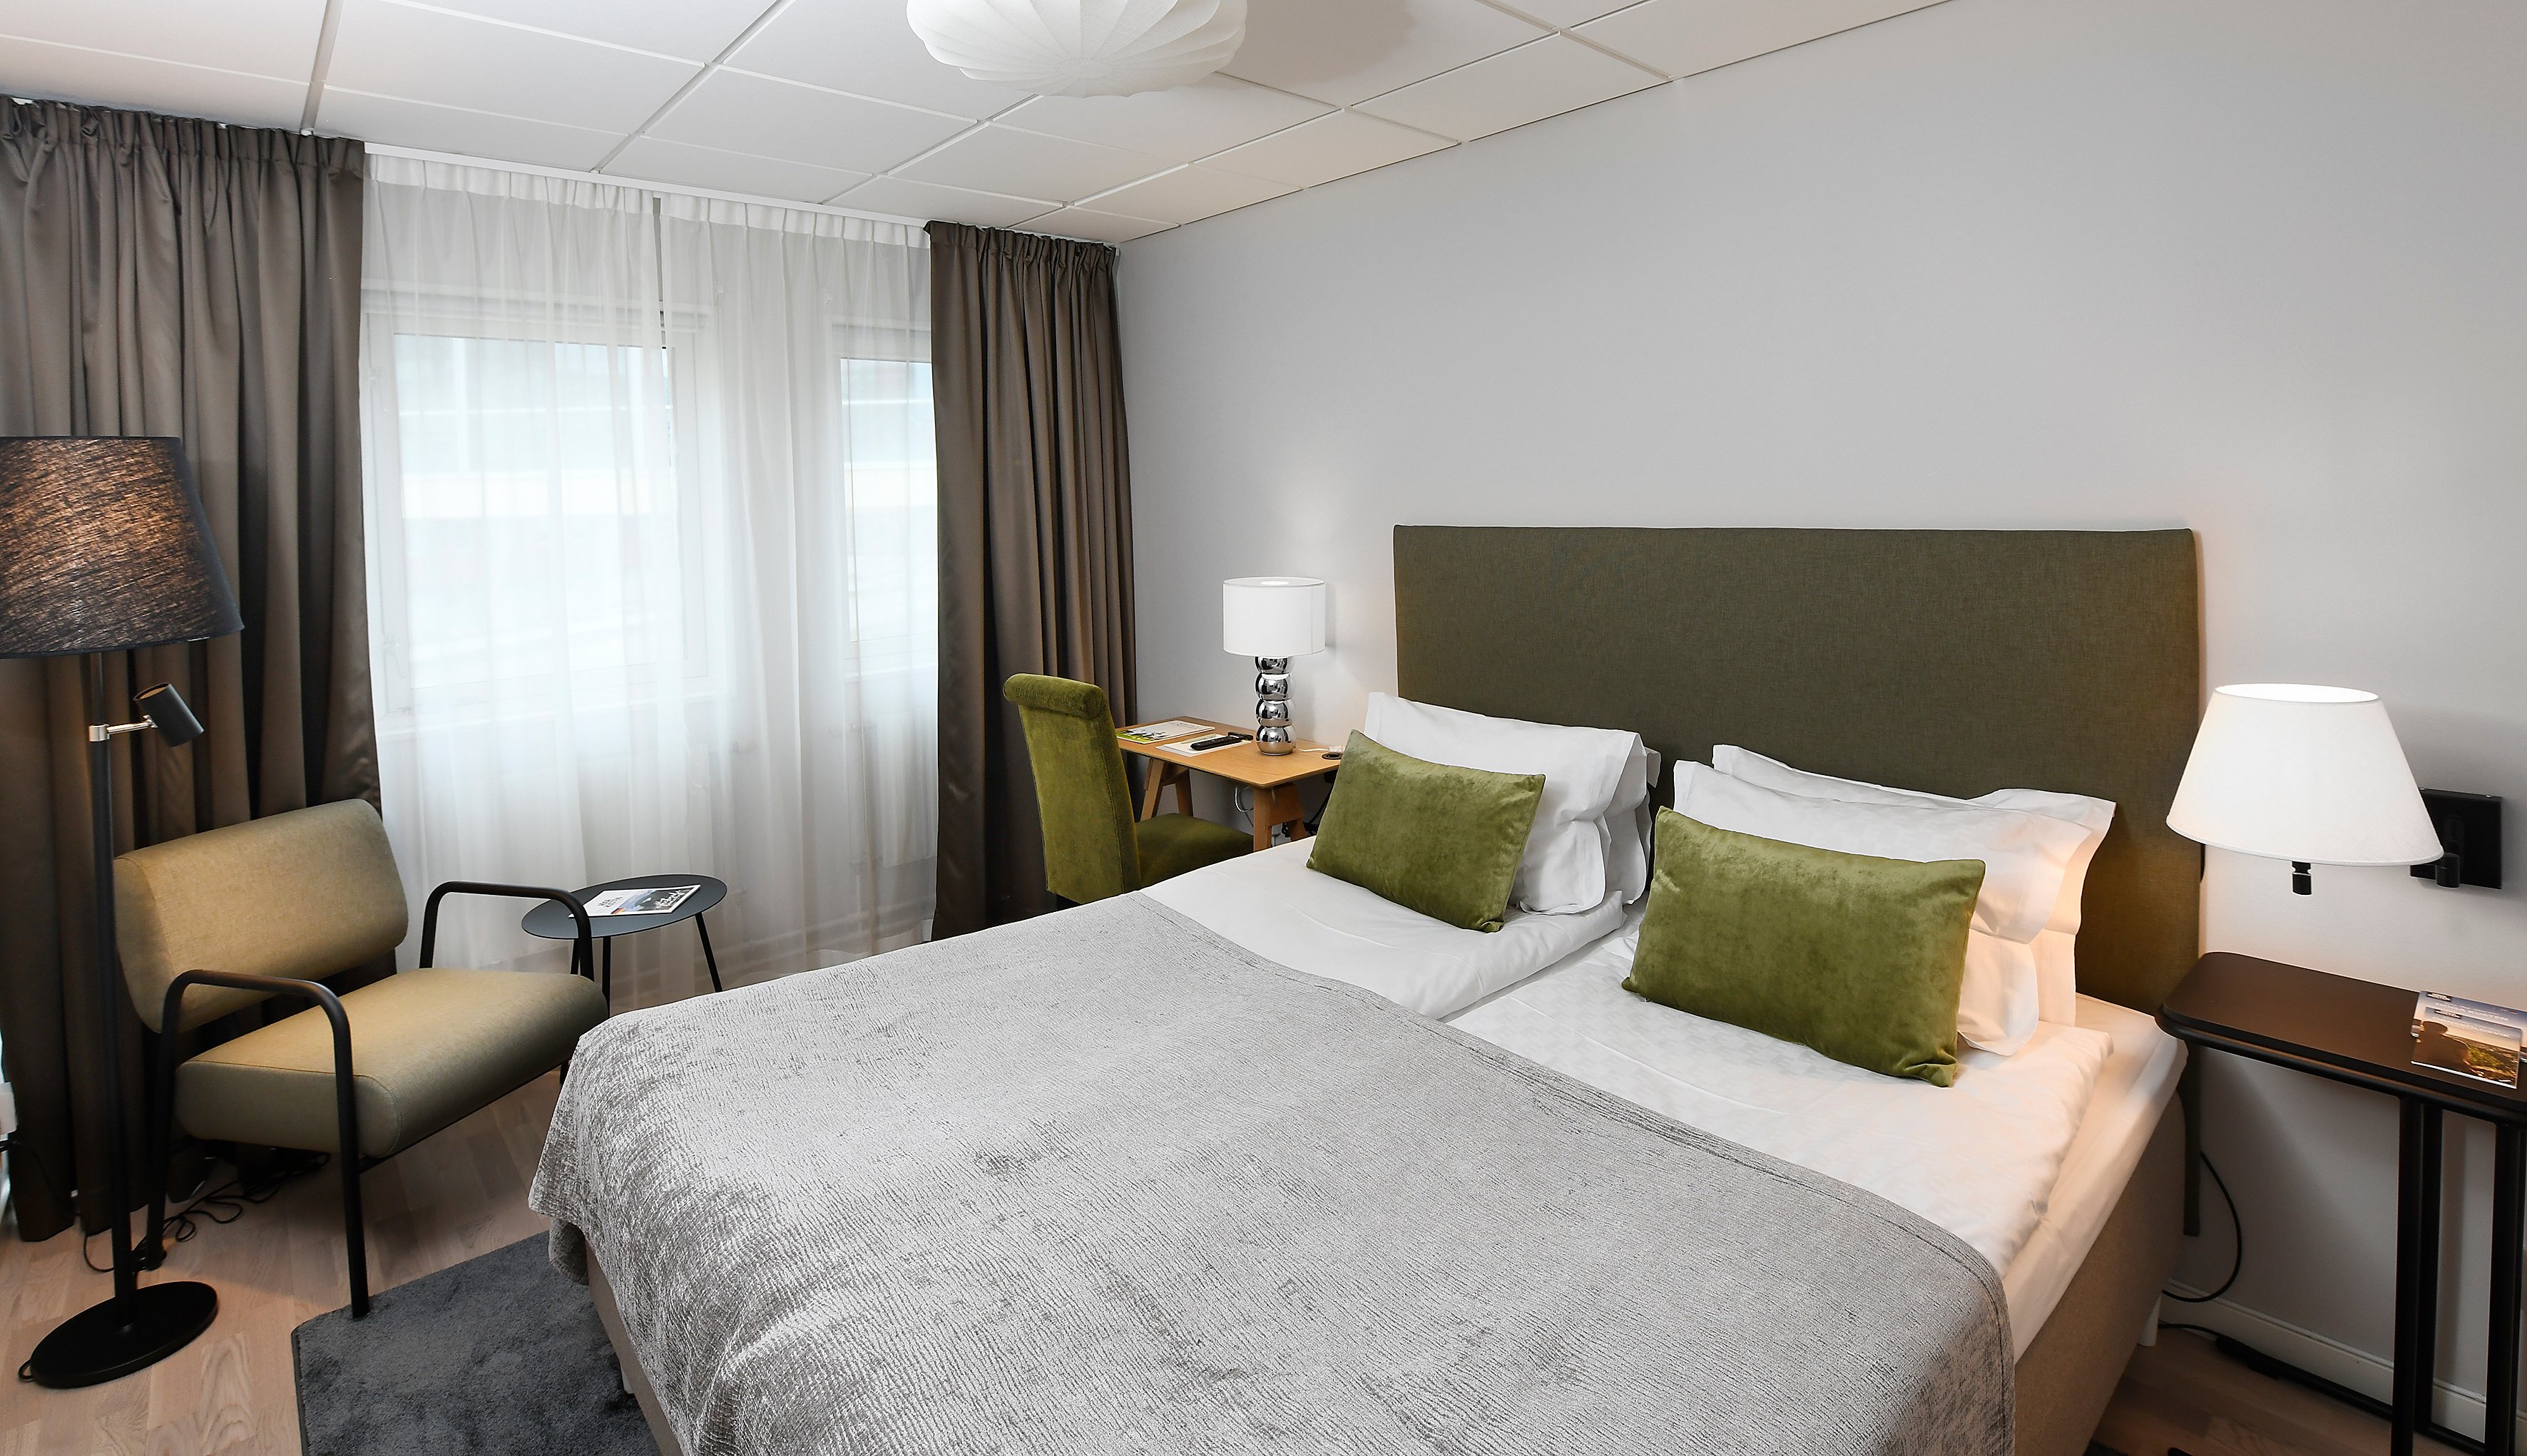 Bright hotel room with double bed, desk, armchair and window